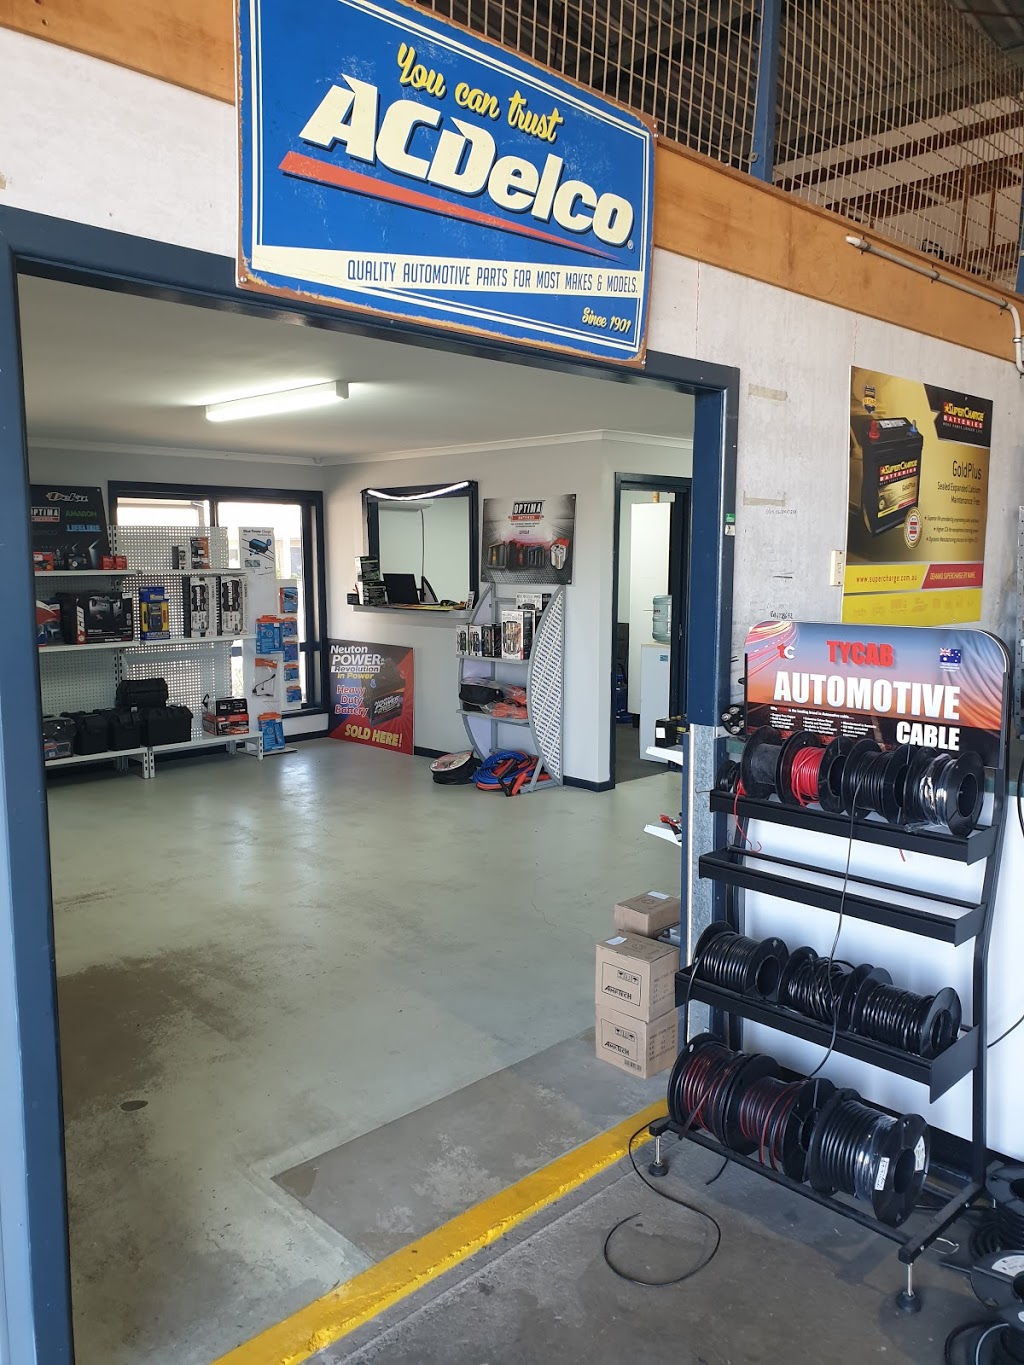 Mobas Batteries | car repair | 414 Frome St, Moree NSW 2400, Australia | 0267521750 OR +61 2 6752 1750